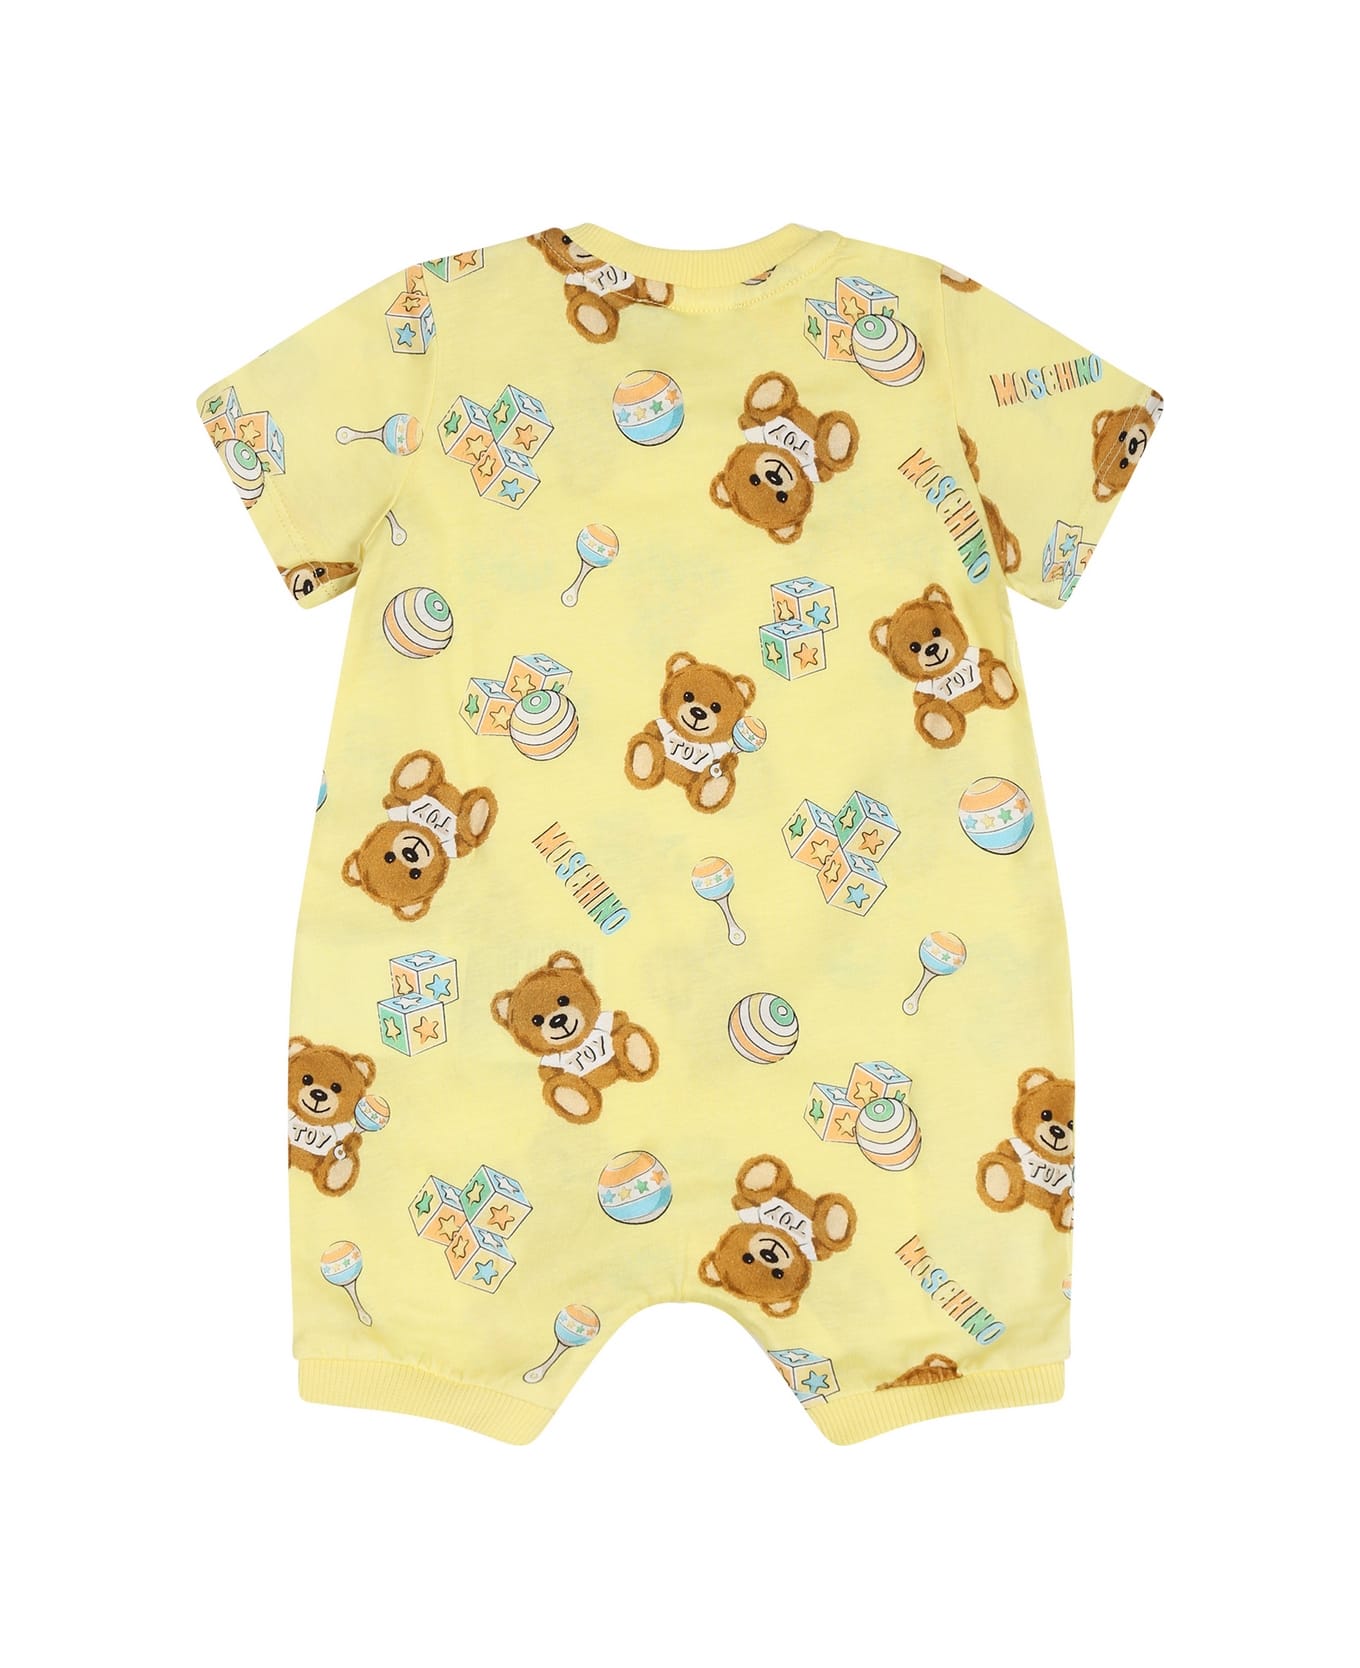 Moschino Yellow Set For Baby Kids With Teddy Bear - Yellow